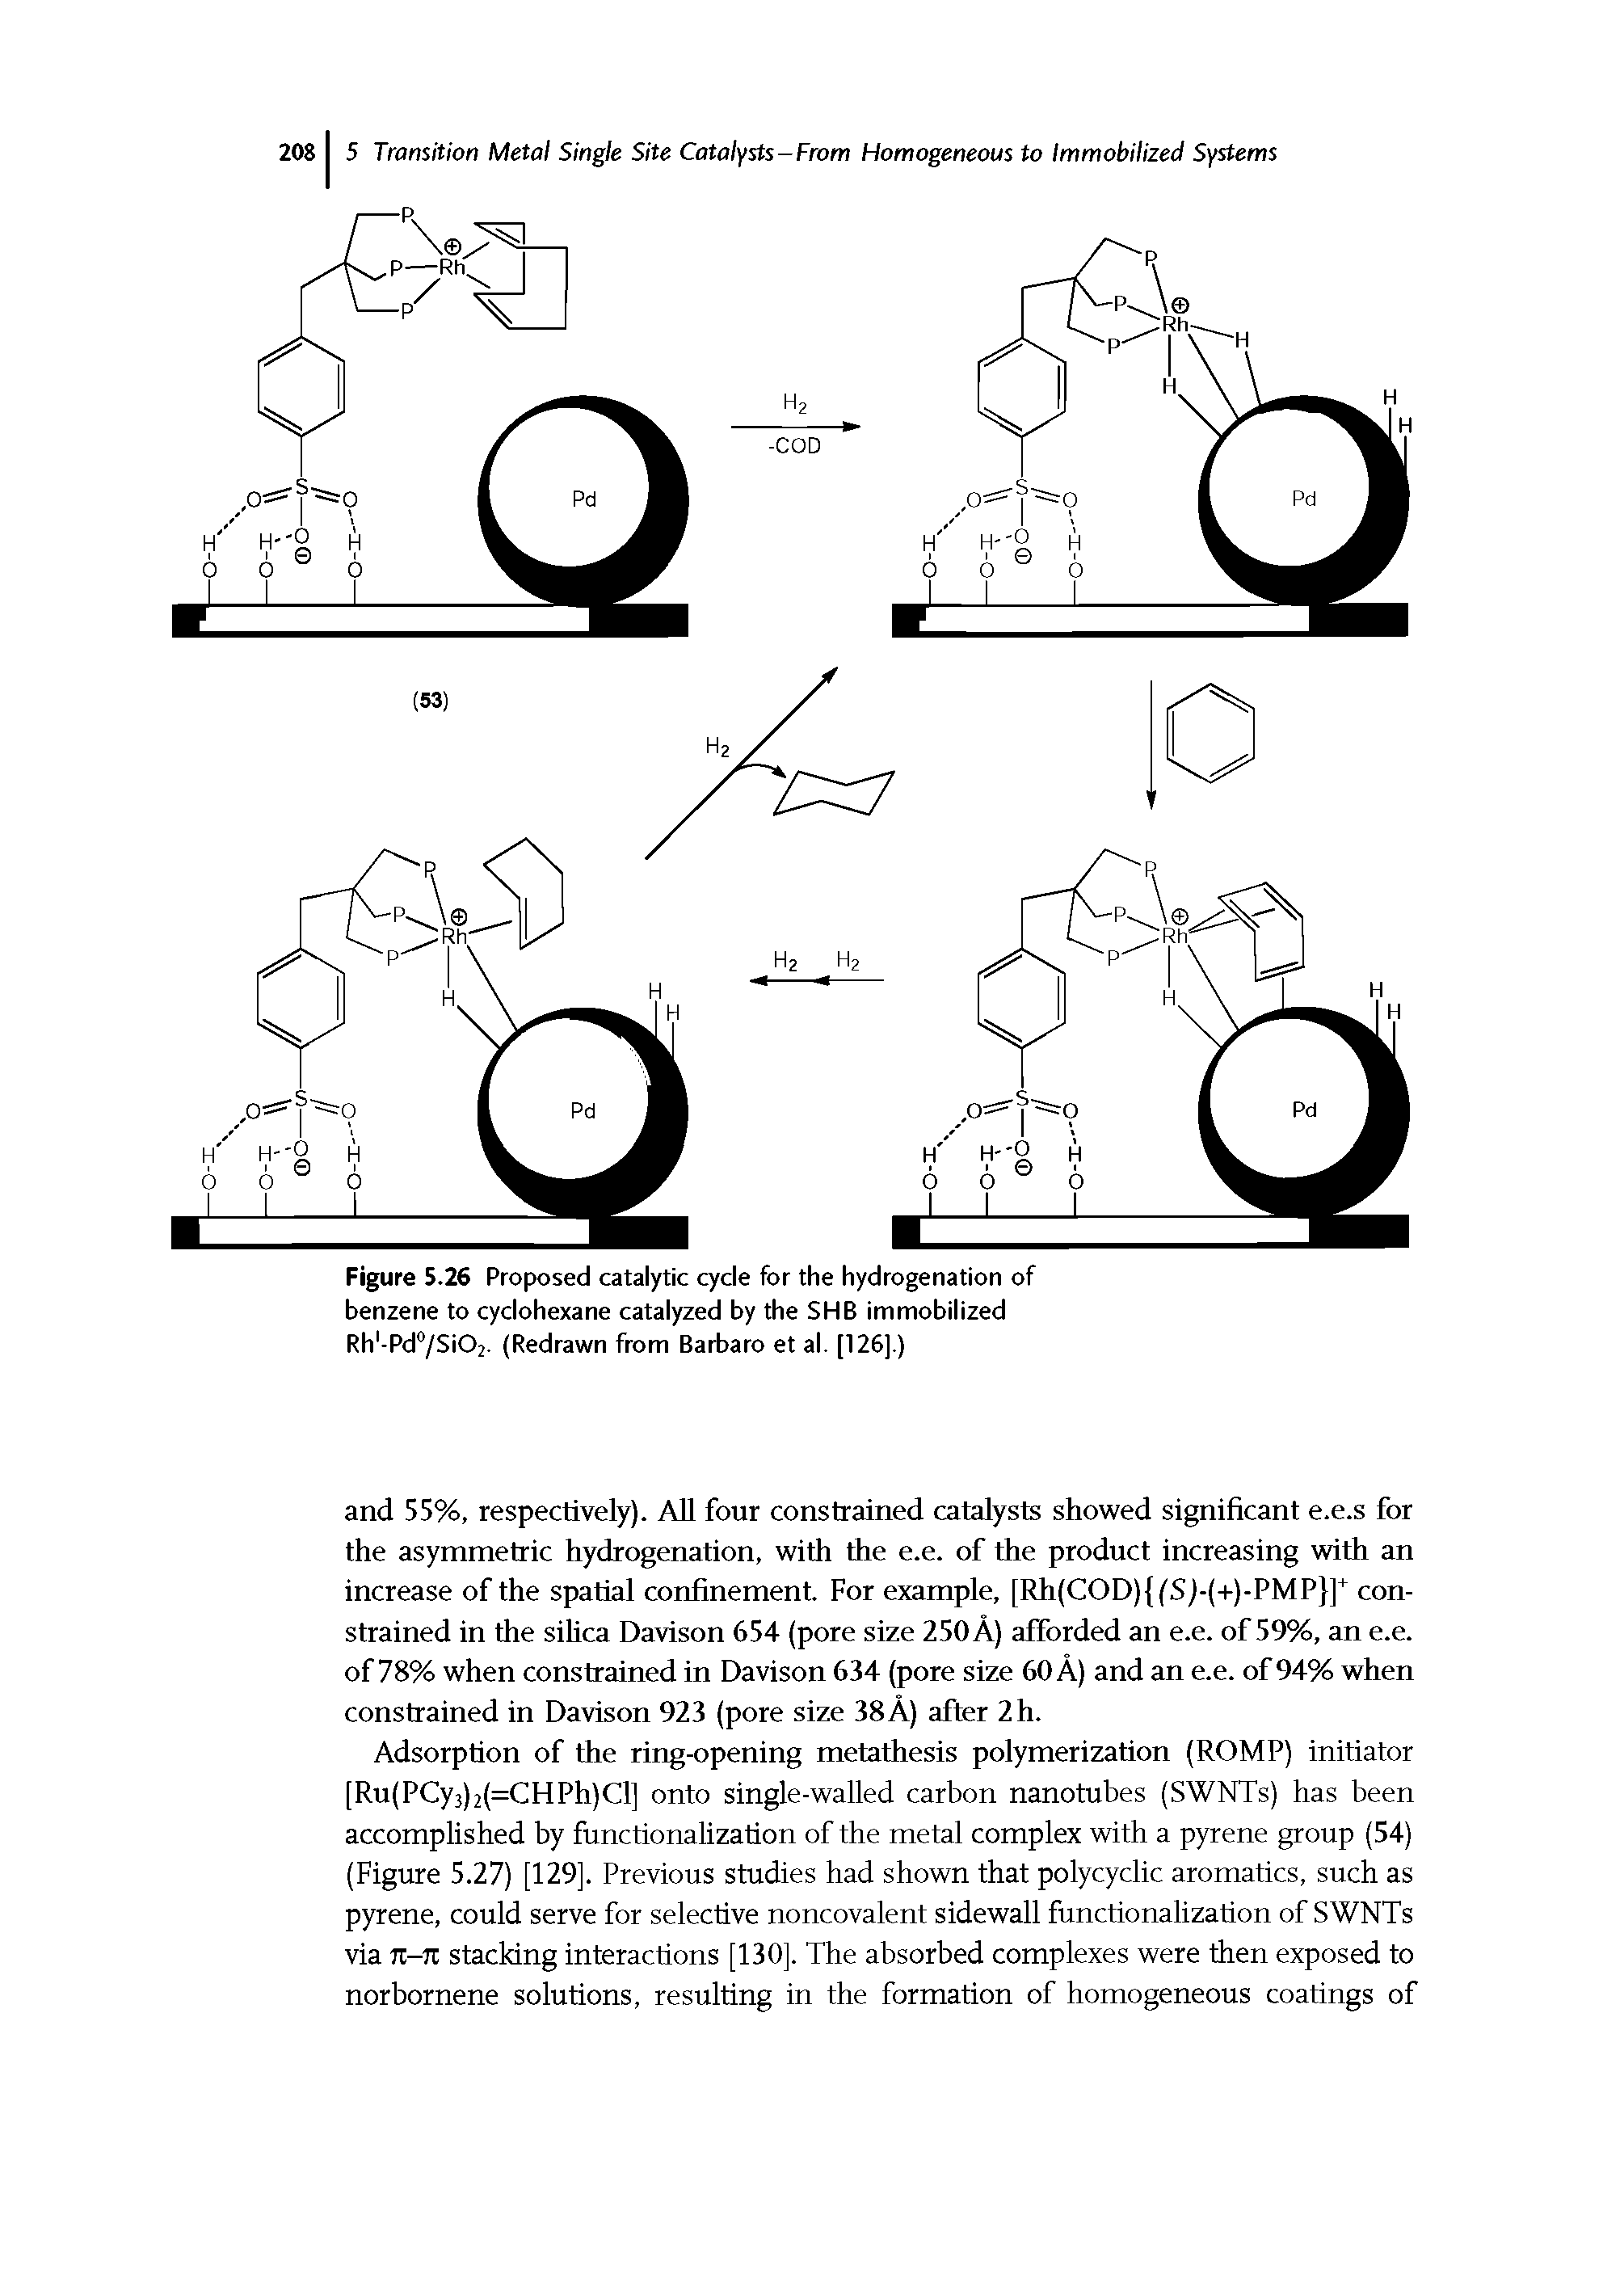 Figure 5.26 Proposed catalytic cycle for the hydrogenation of benzene to cyclohexane catalyzed by the SHB immobilized Rh -Pd7Si02. (Redrawn from Barbaro et al. [126].)...